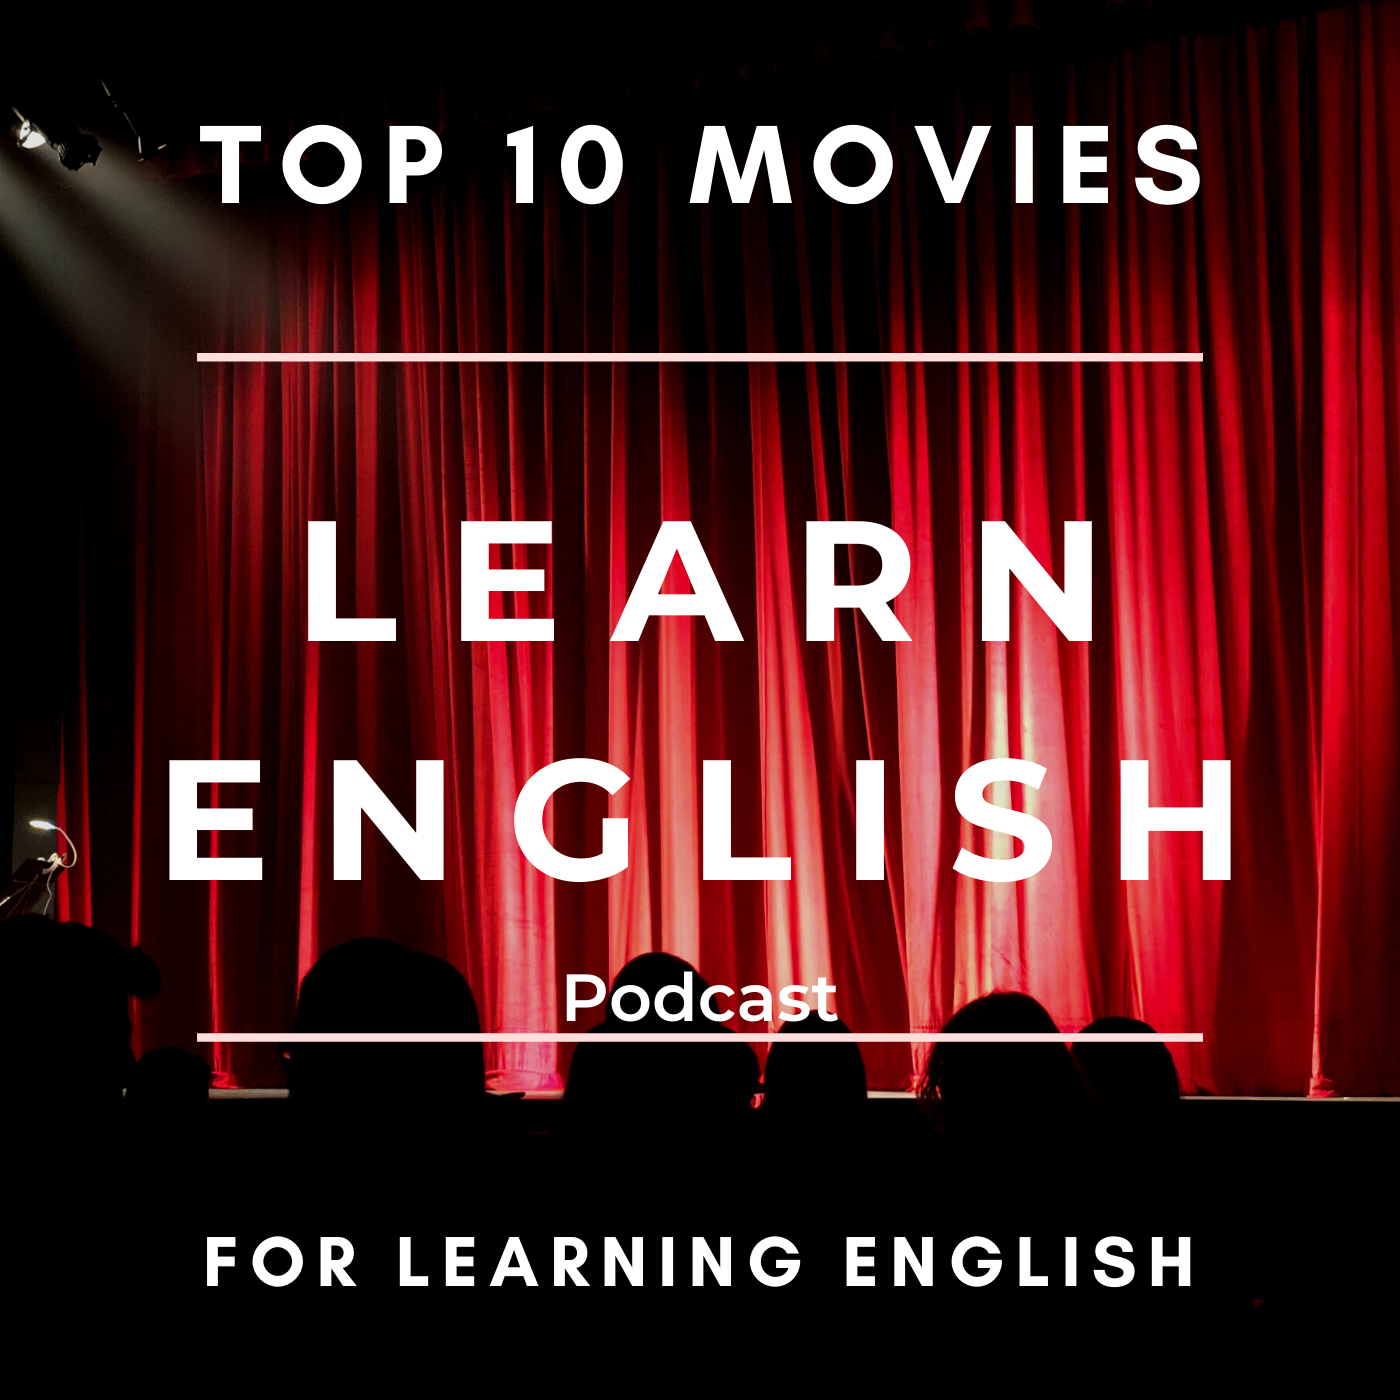 Learn English Podcast: Top 10 Movies for Learning English (Minea Season 1, Episode 8)